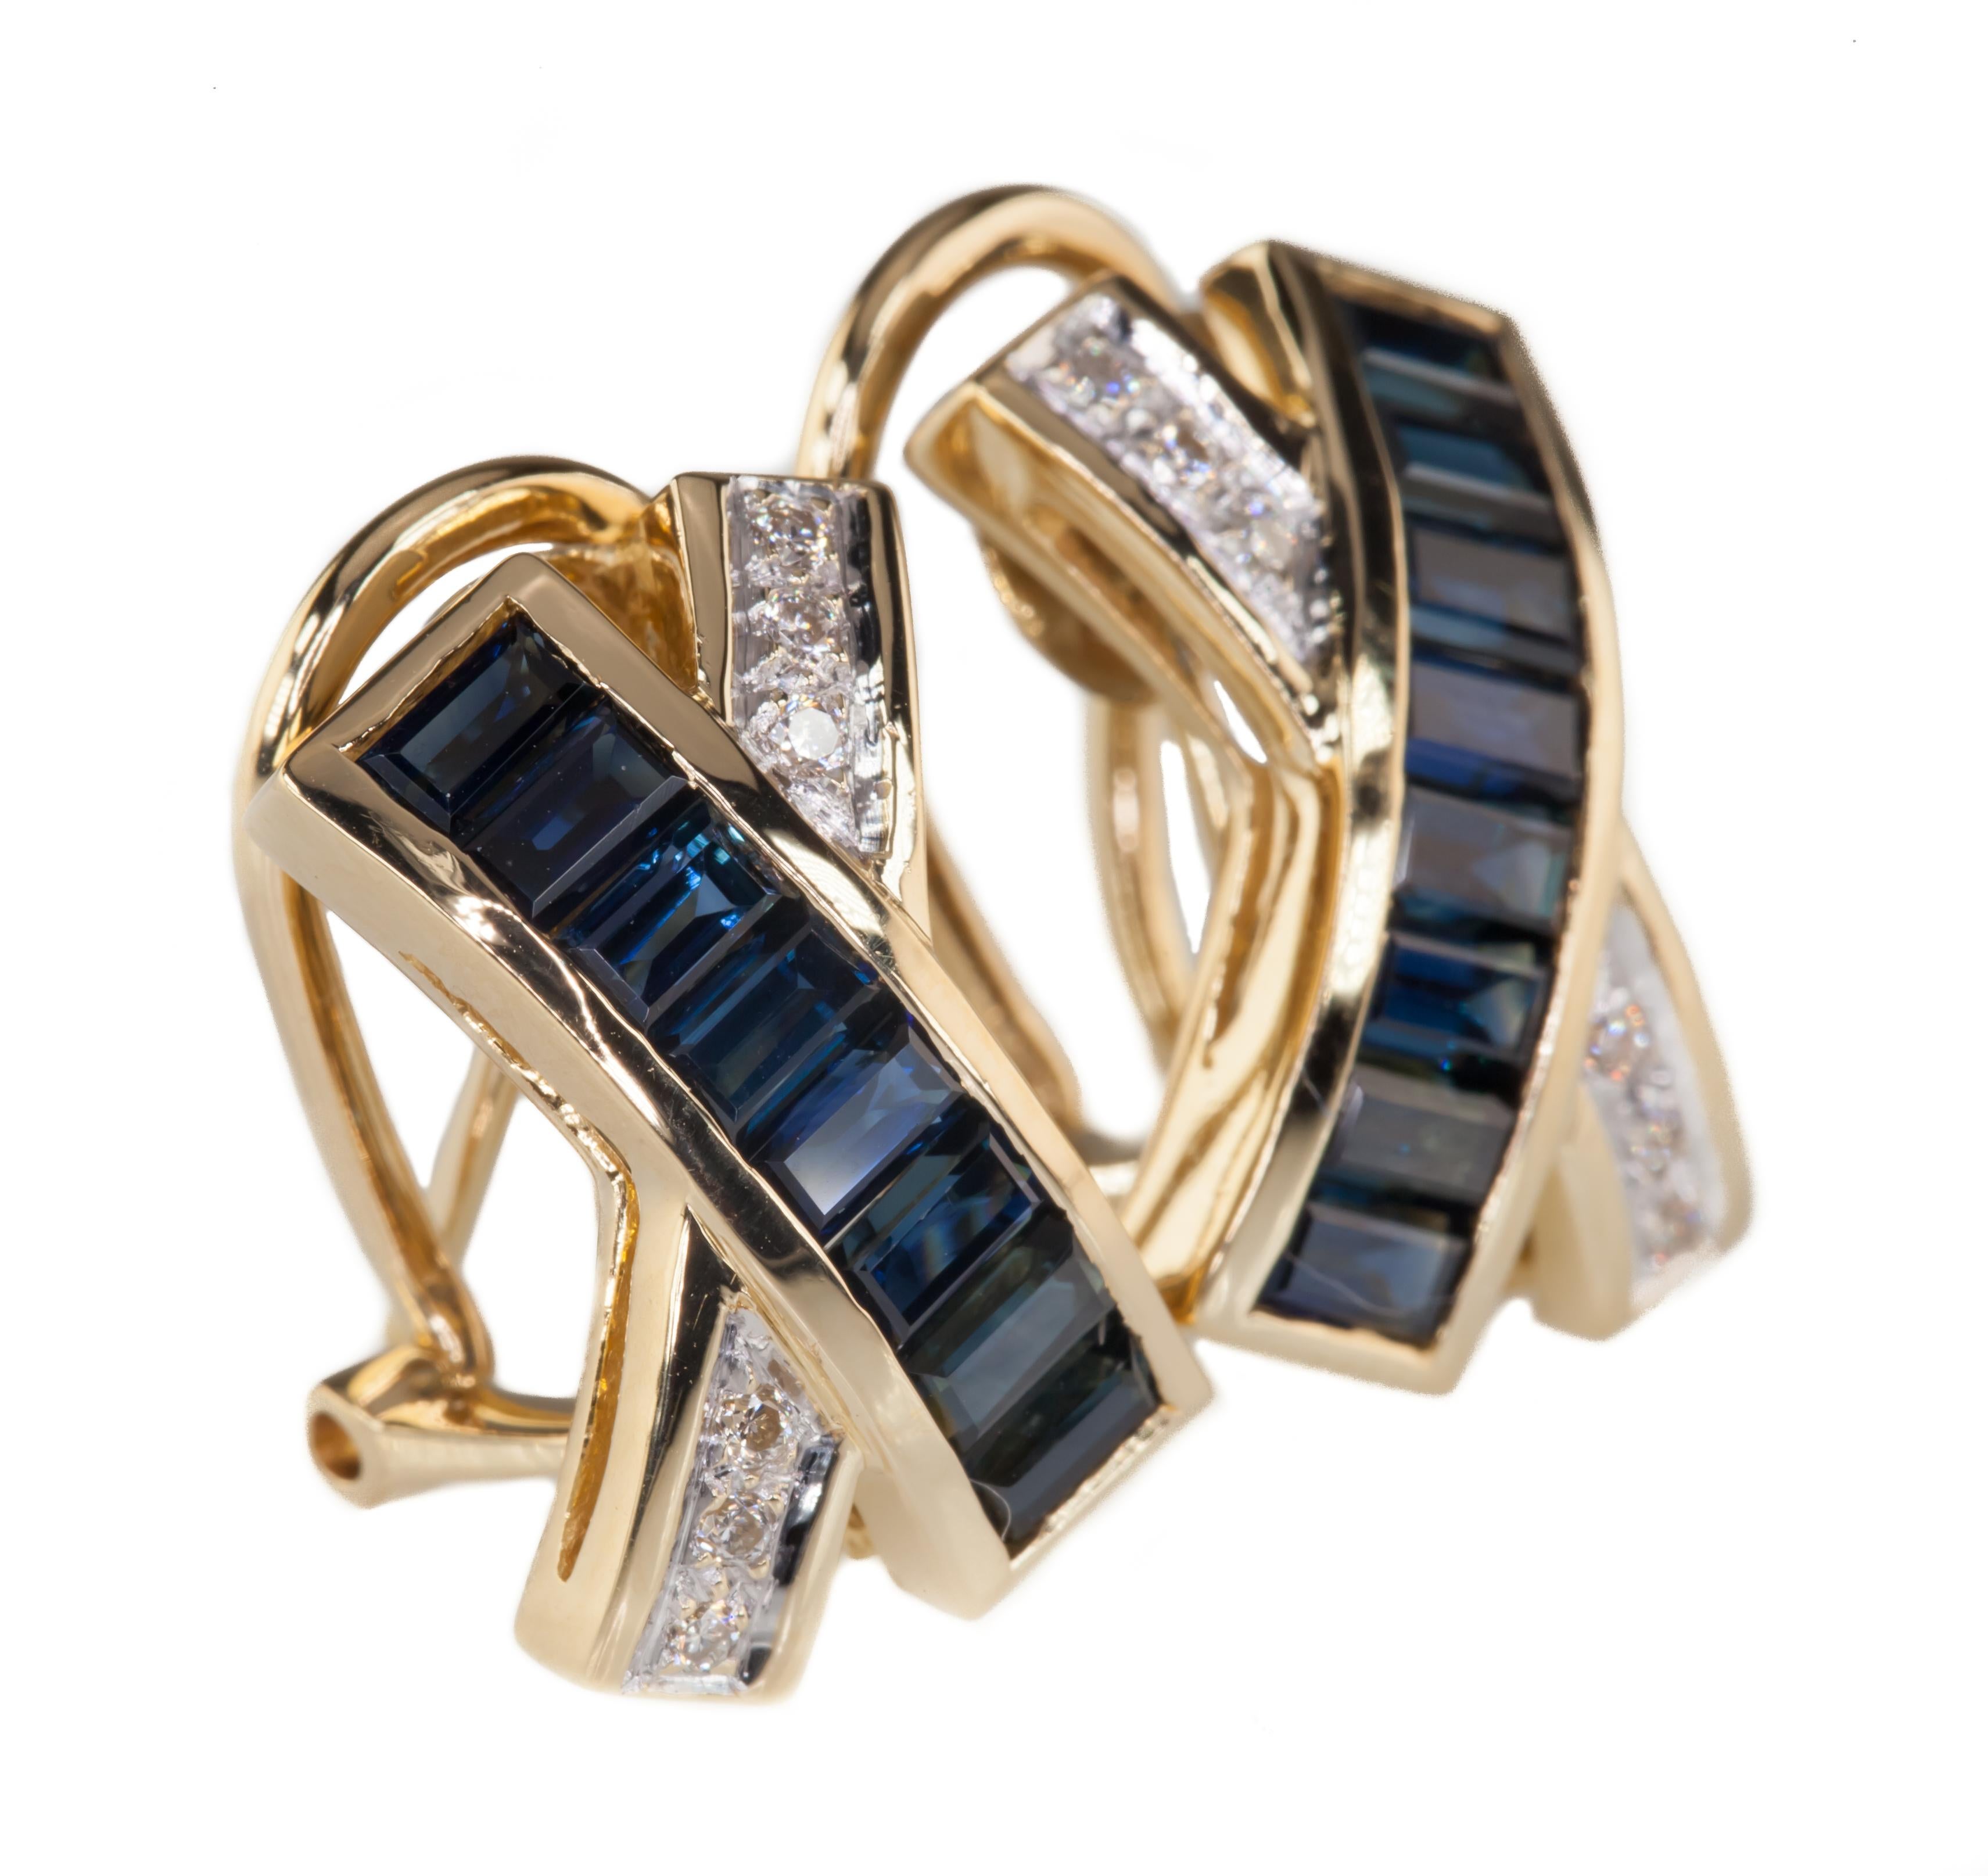 Gorgeous Criss-Cross Diamond and Sapphire Earrings
Feature Pave Set Round Diamonds and Channel Set Baguette Sapphires
Total Sapphire Weight = Appx 1.60 cts
Total Diamond Weight = Appx 0.10 ctts
Average Color = I
Average Clarity = SI1
Total Length =